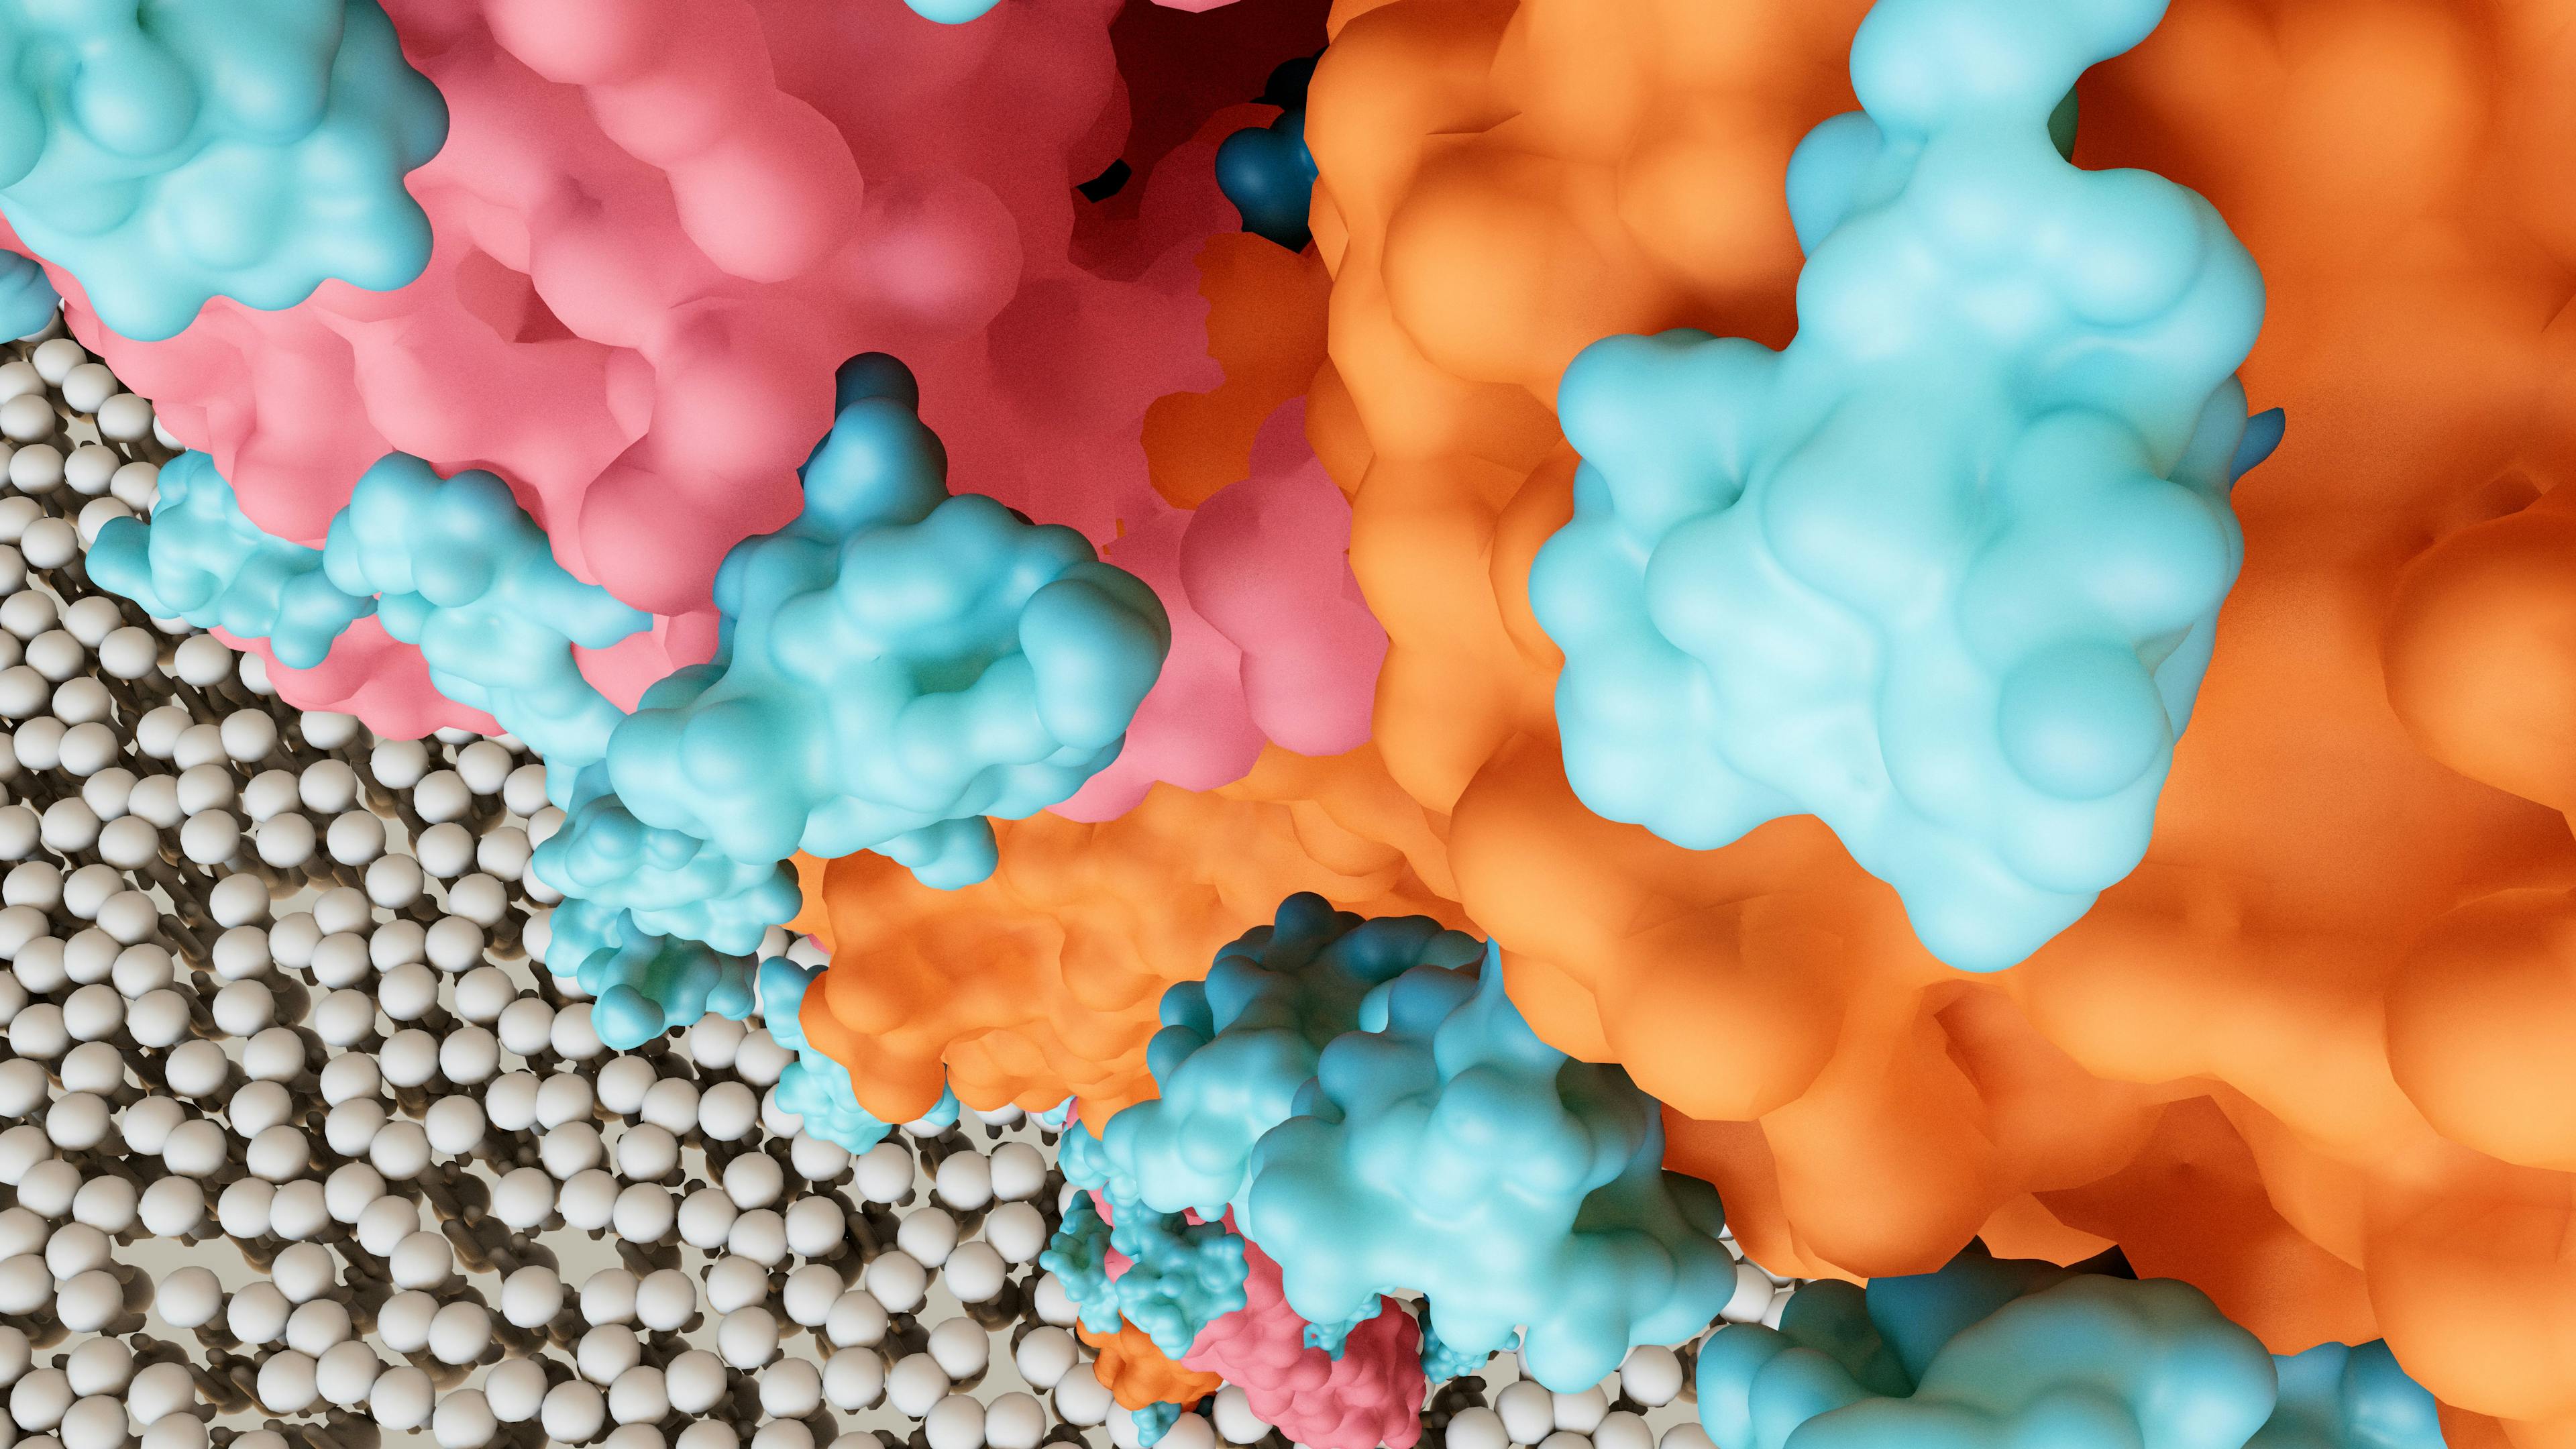 SARS-CoV-2 Spike Protein glycan shield (in blue) thwart the host immune response. Coronavirus structure. | Image Credit: © Design Cells - stock.adobe.com.